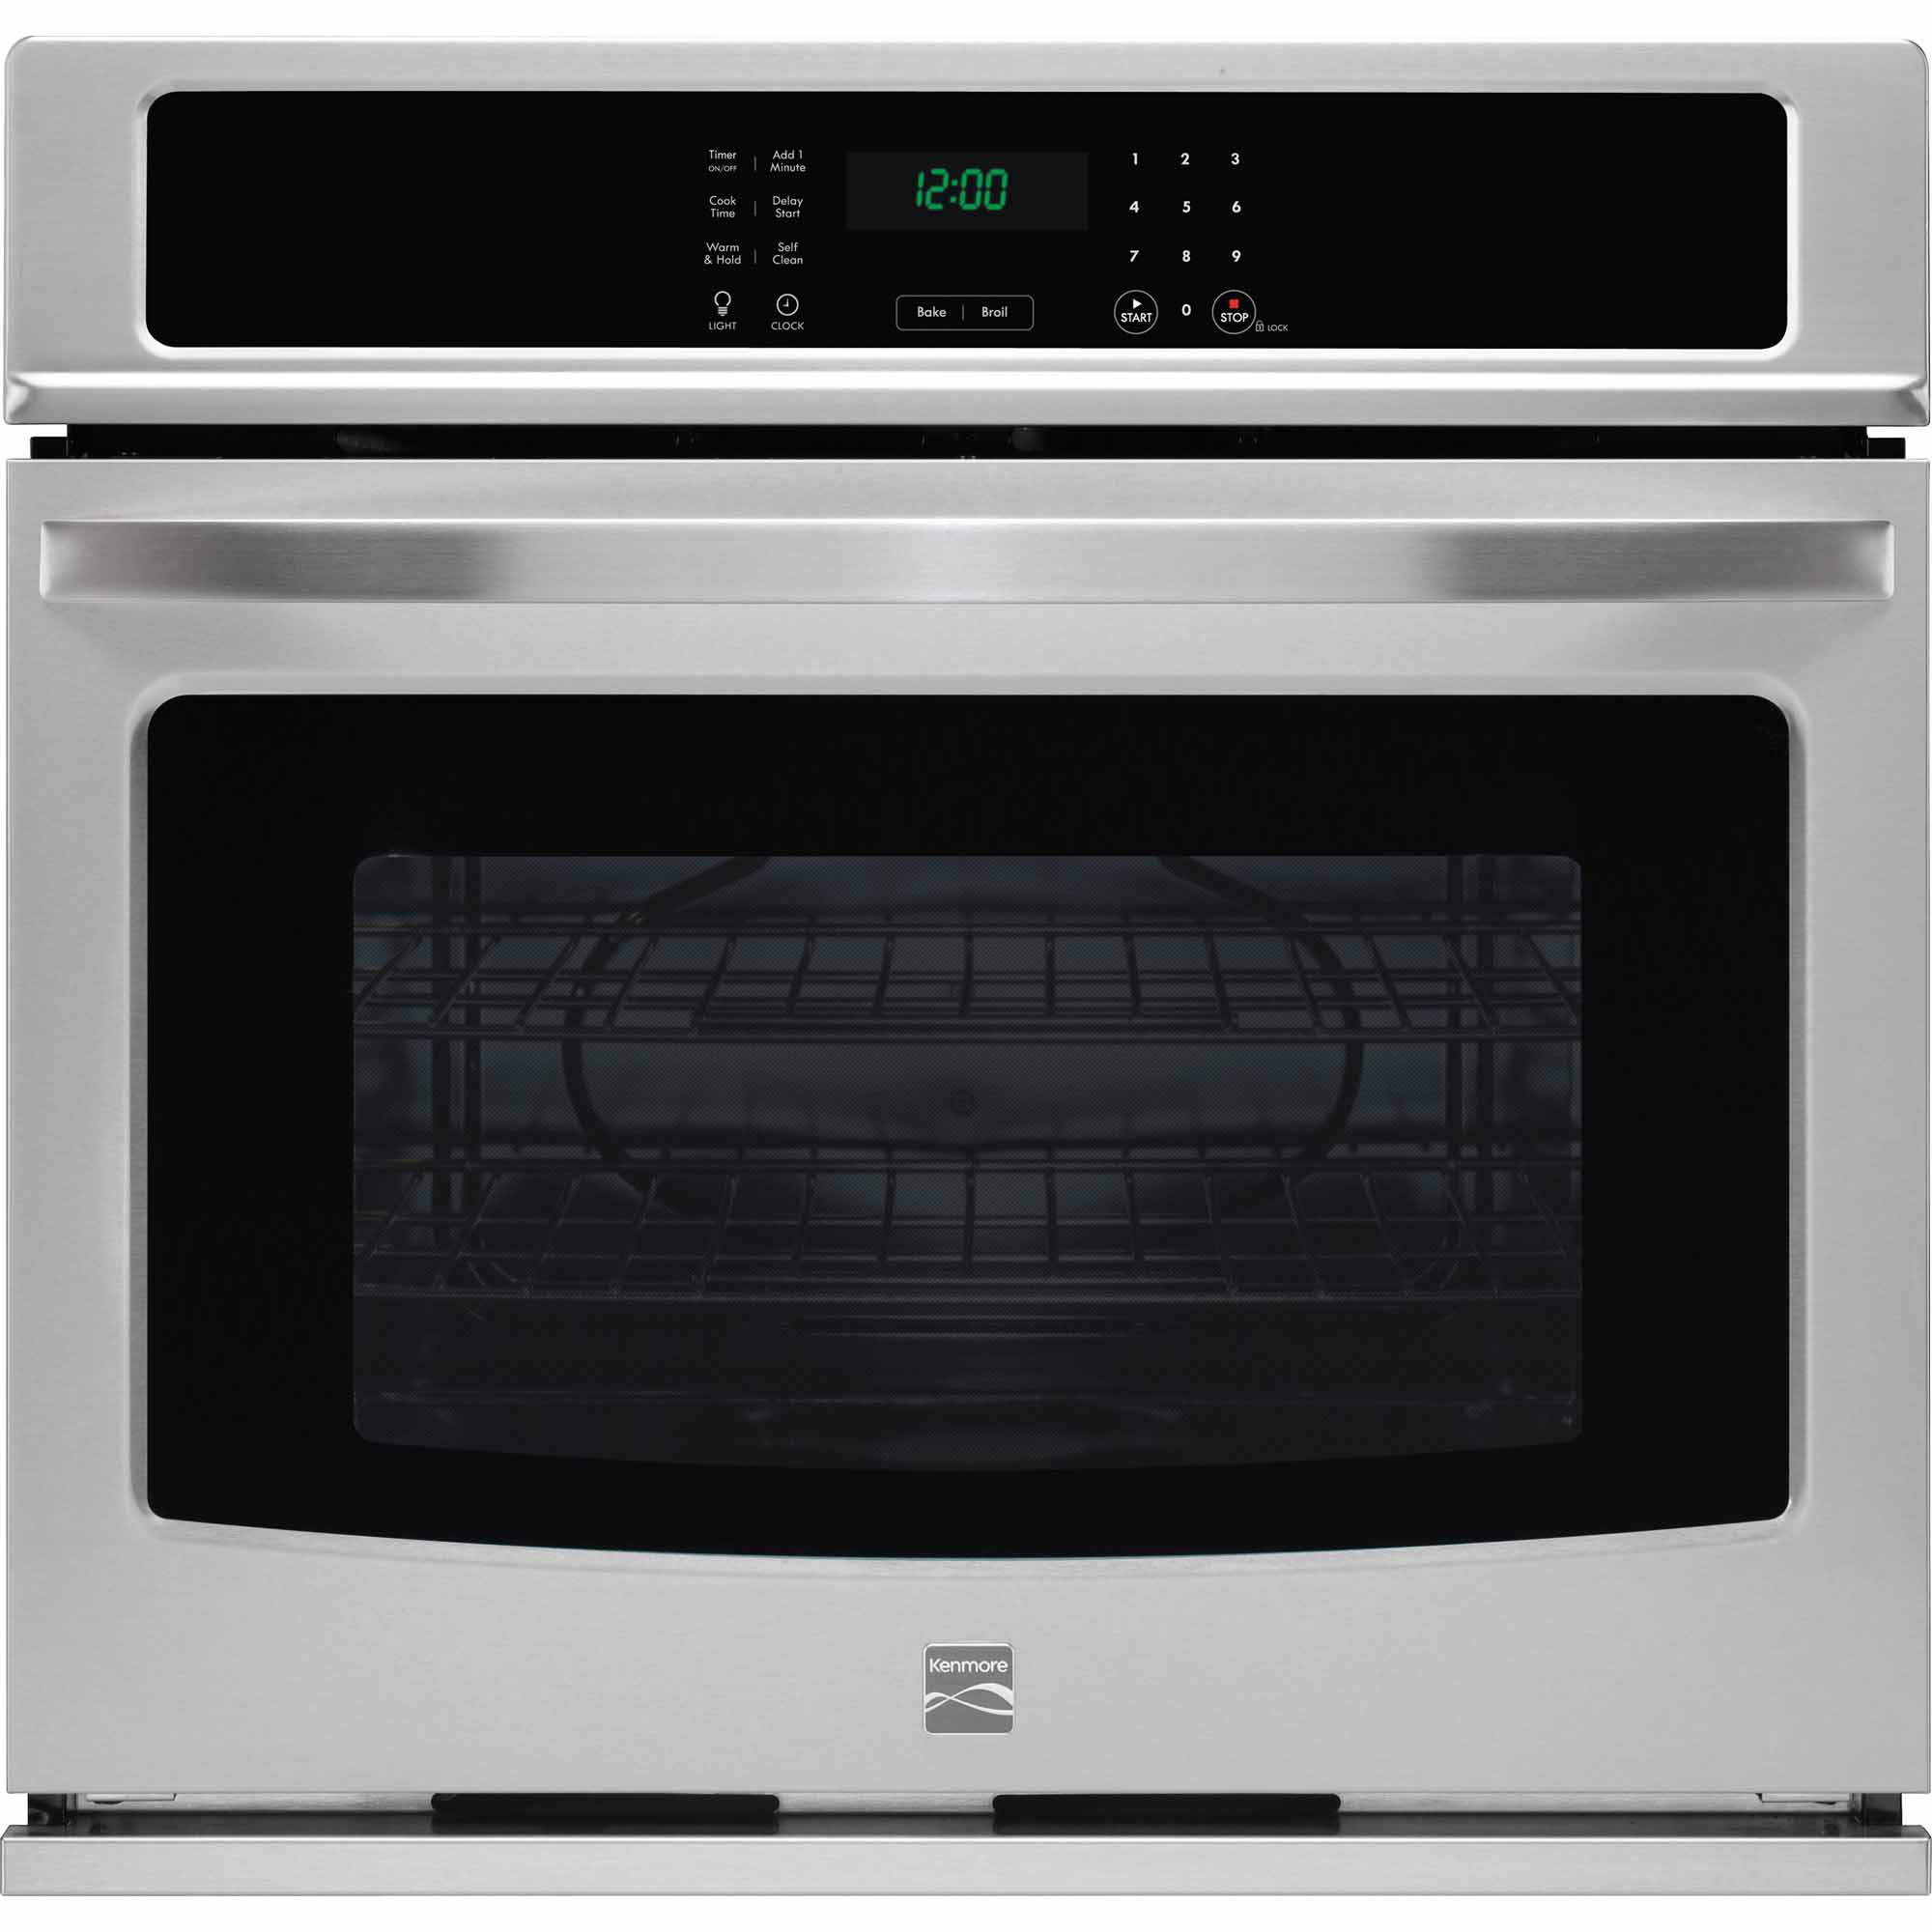 0012505800849 - 49403 27 ELECTRIC SELF-CLEAN SINGLE WALL OVEN - STAINLESS STEEL